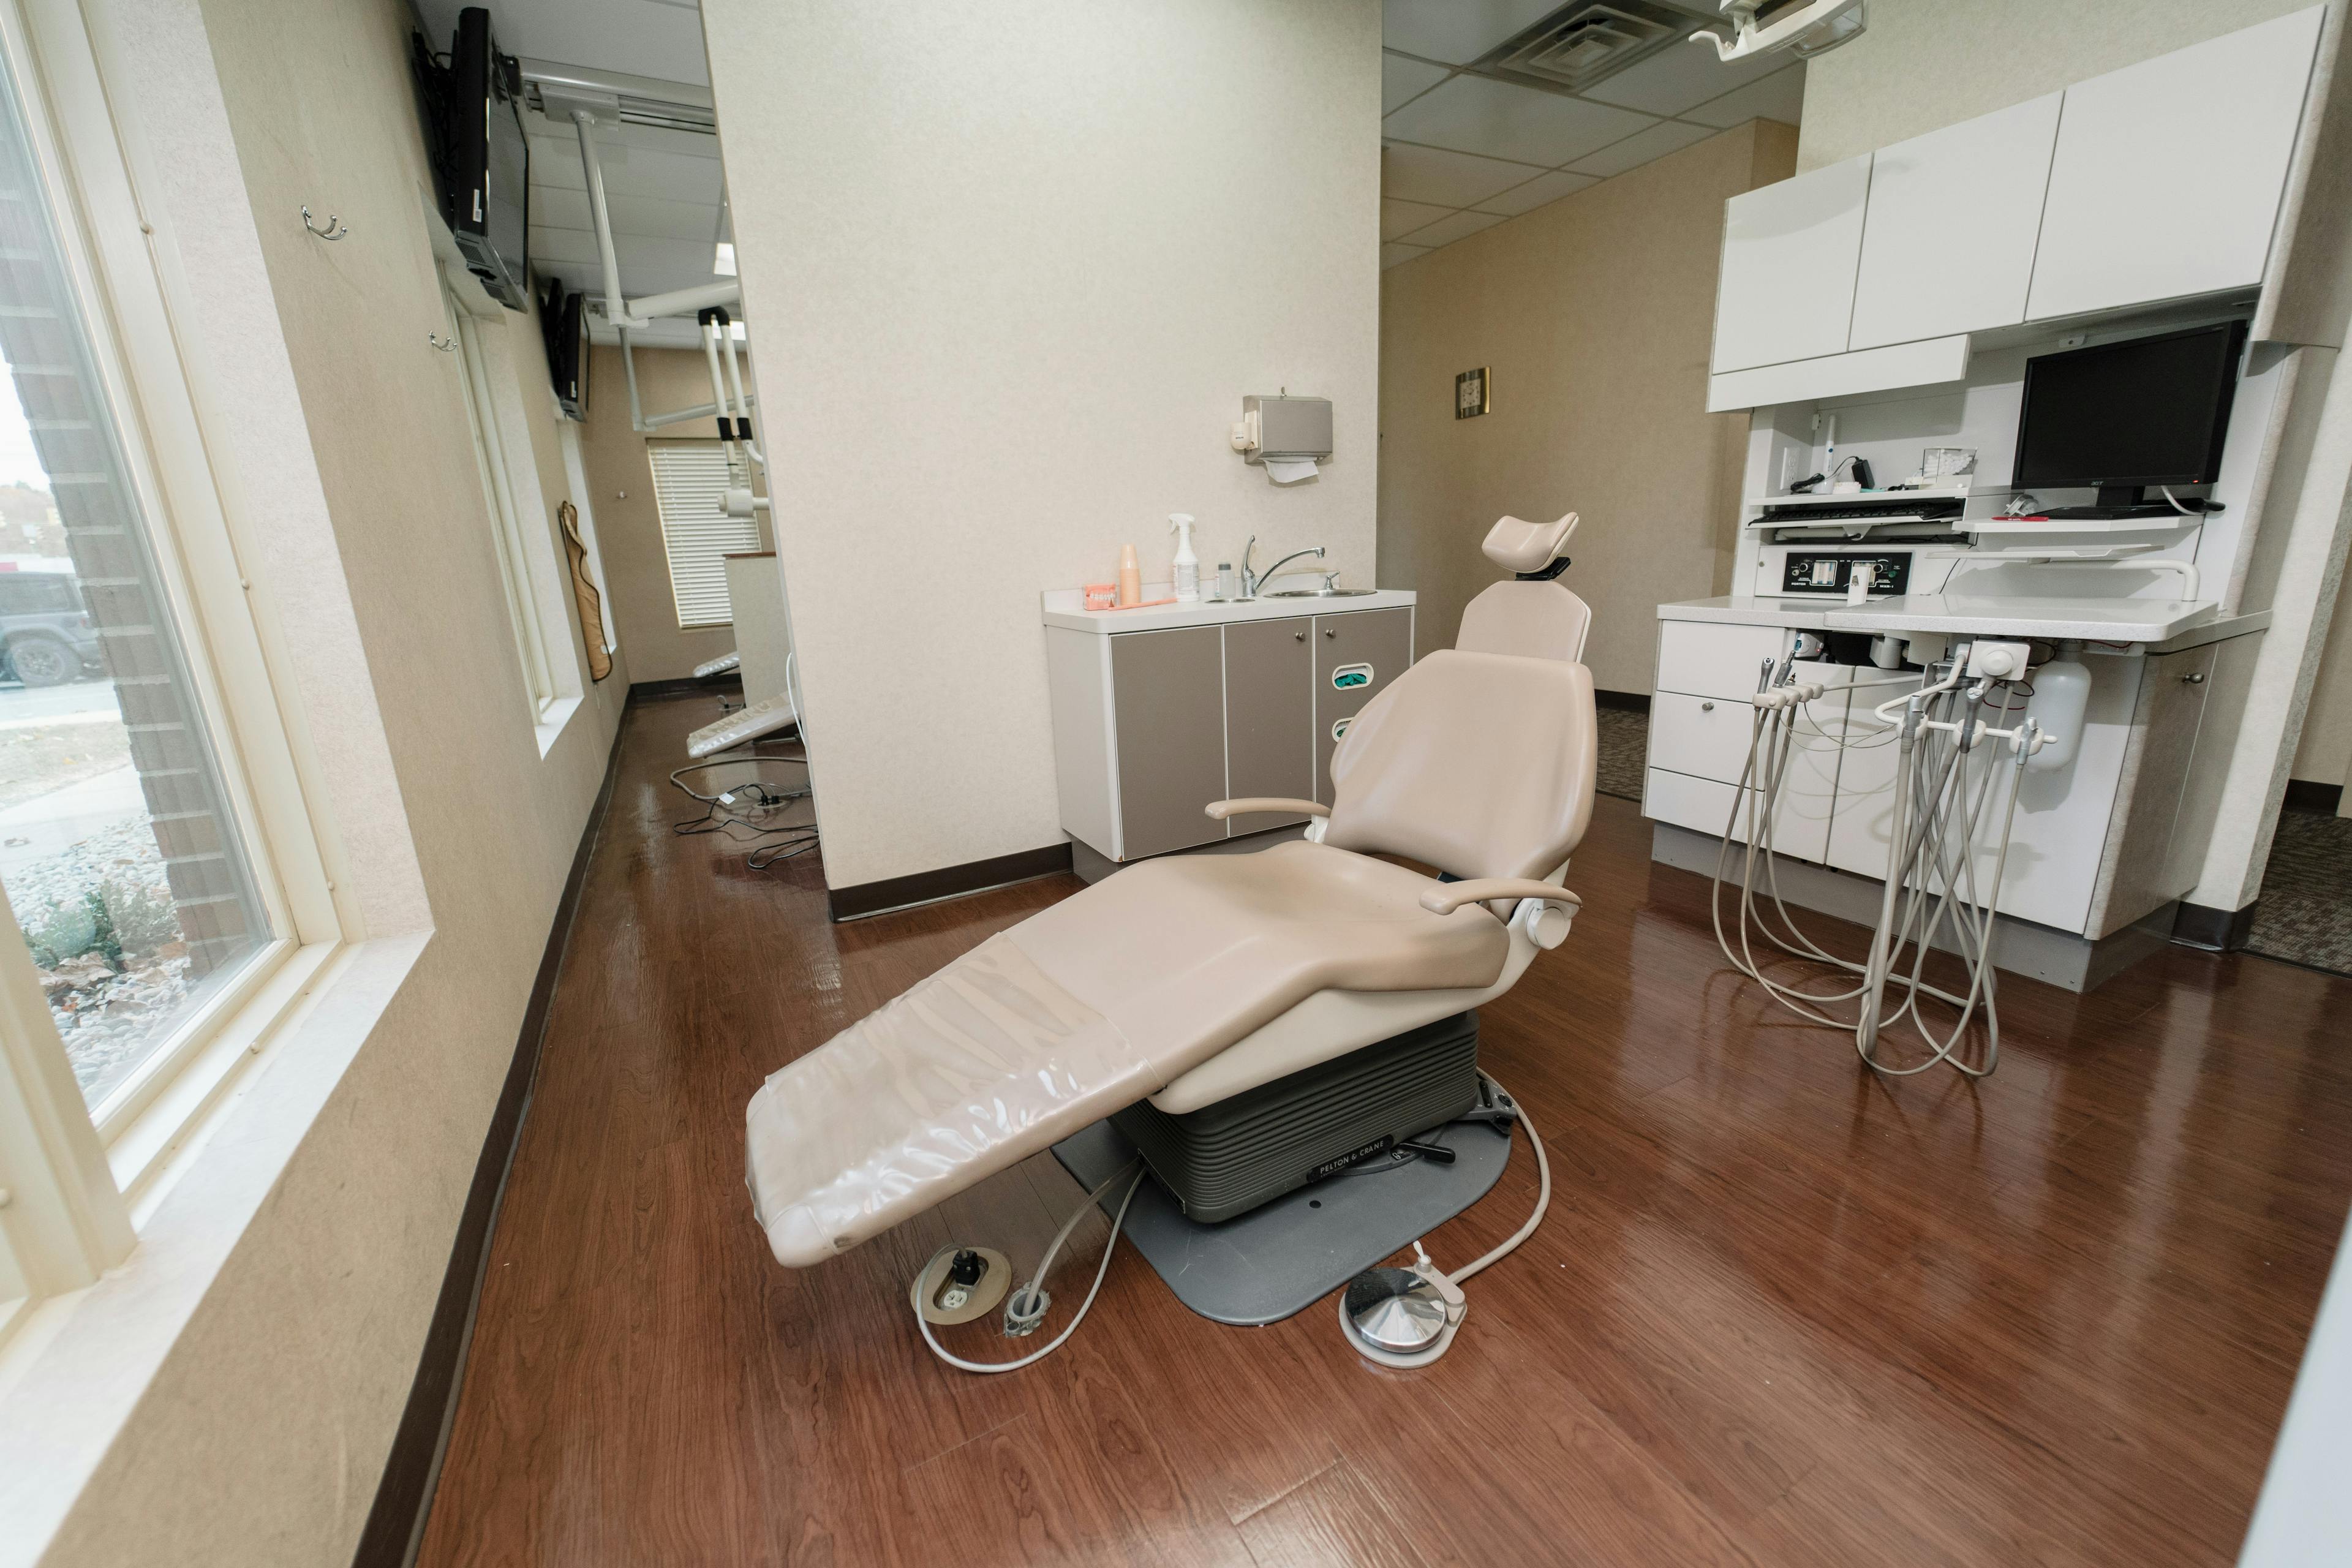 dental-office-action-image